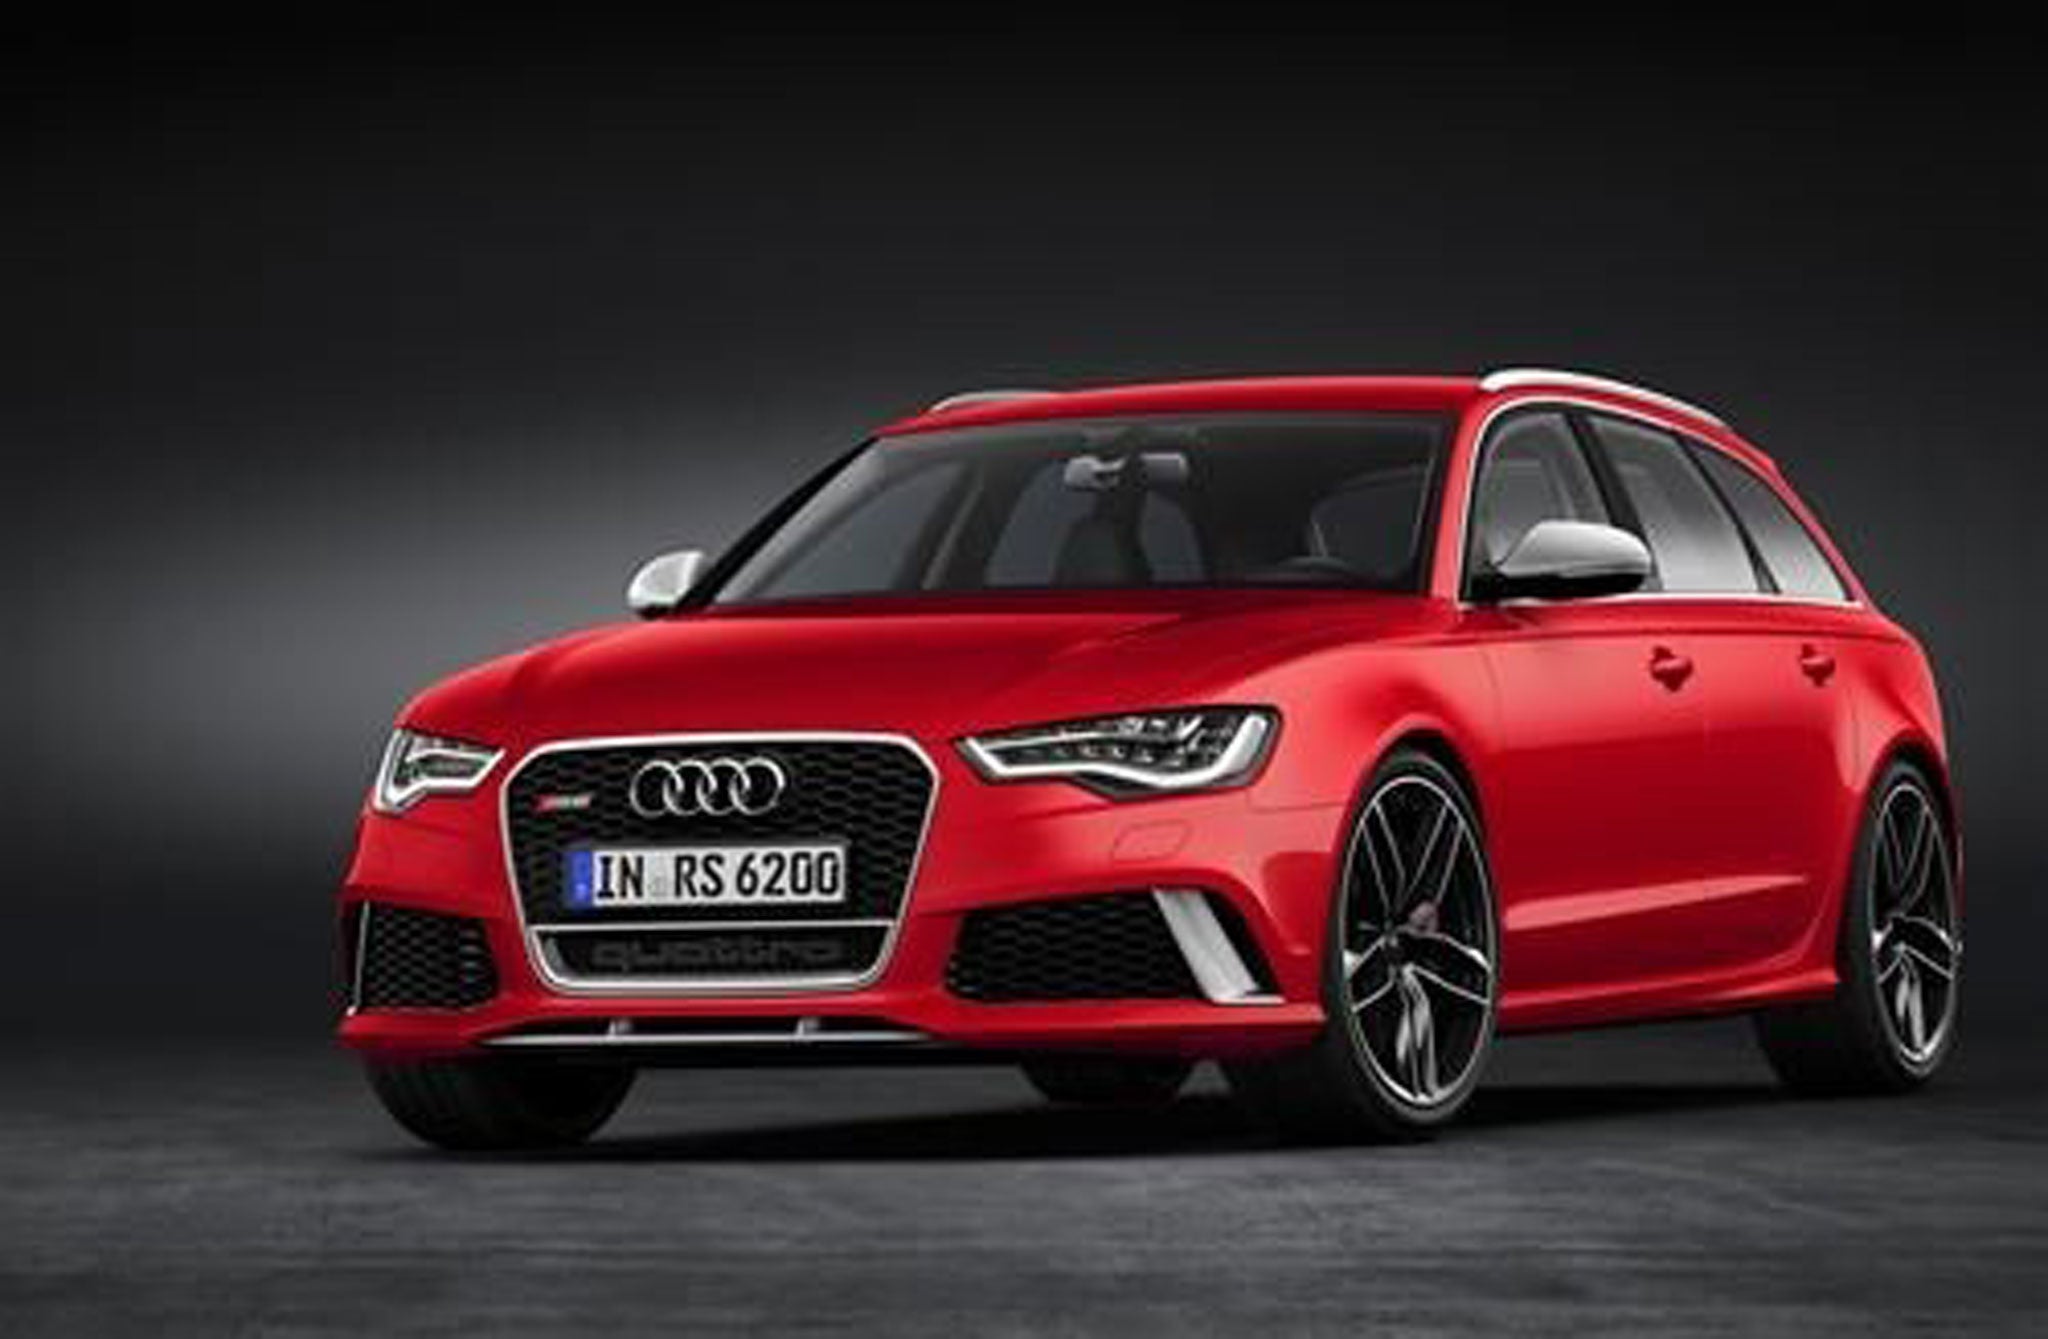 The Audi RS 6 Avant goes from 0 to 62mph in just 3.9 seconds